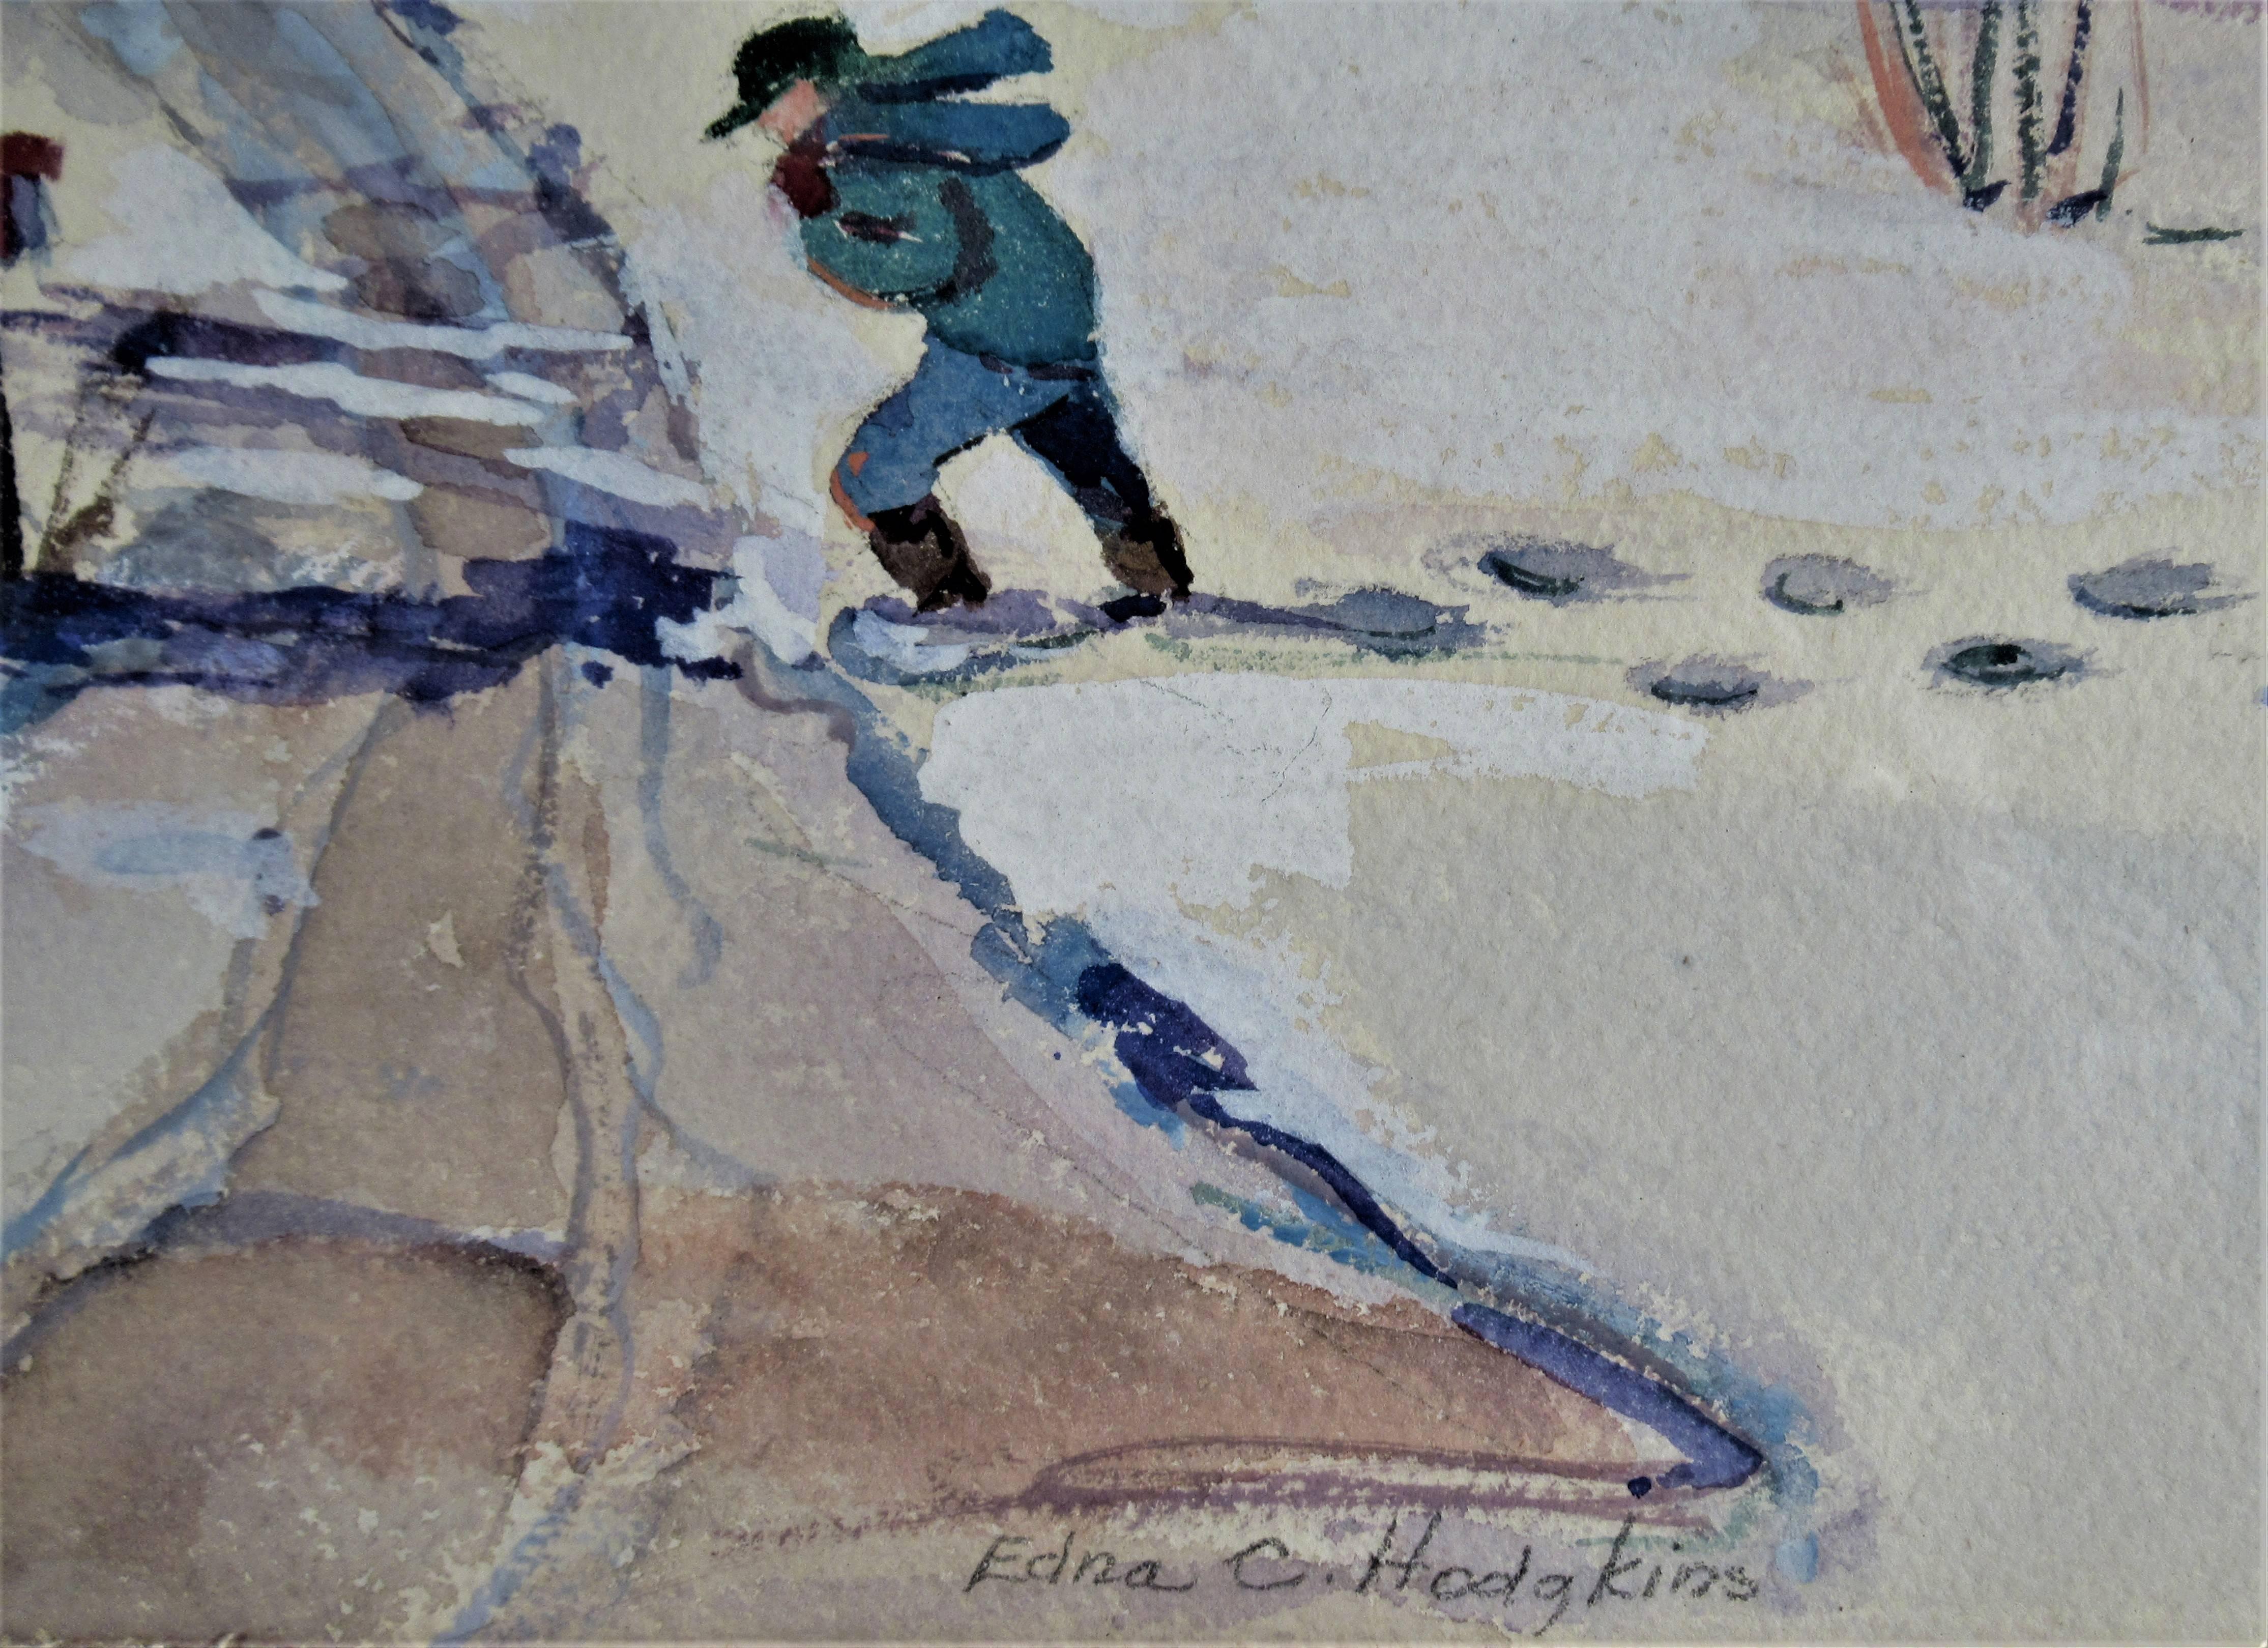 Getting the Mail - Gray Landscape Art by Edna Choate Hodgkins